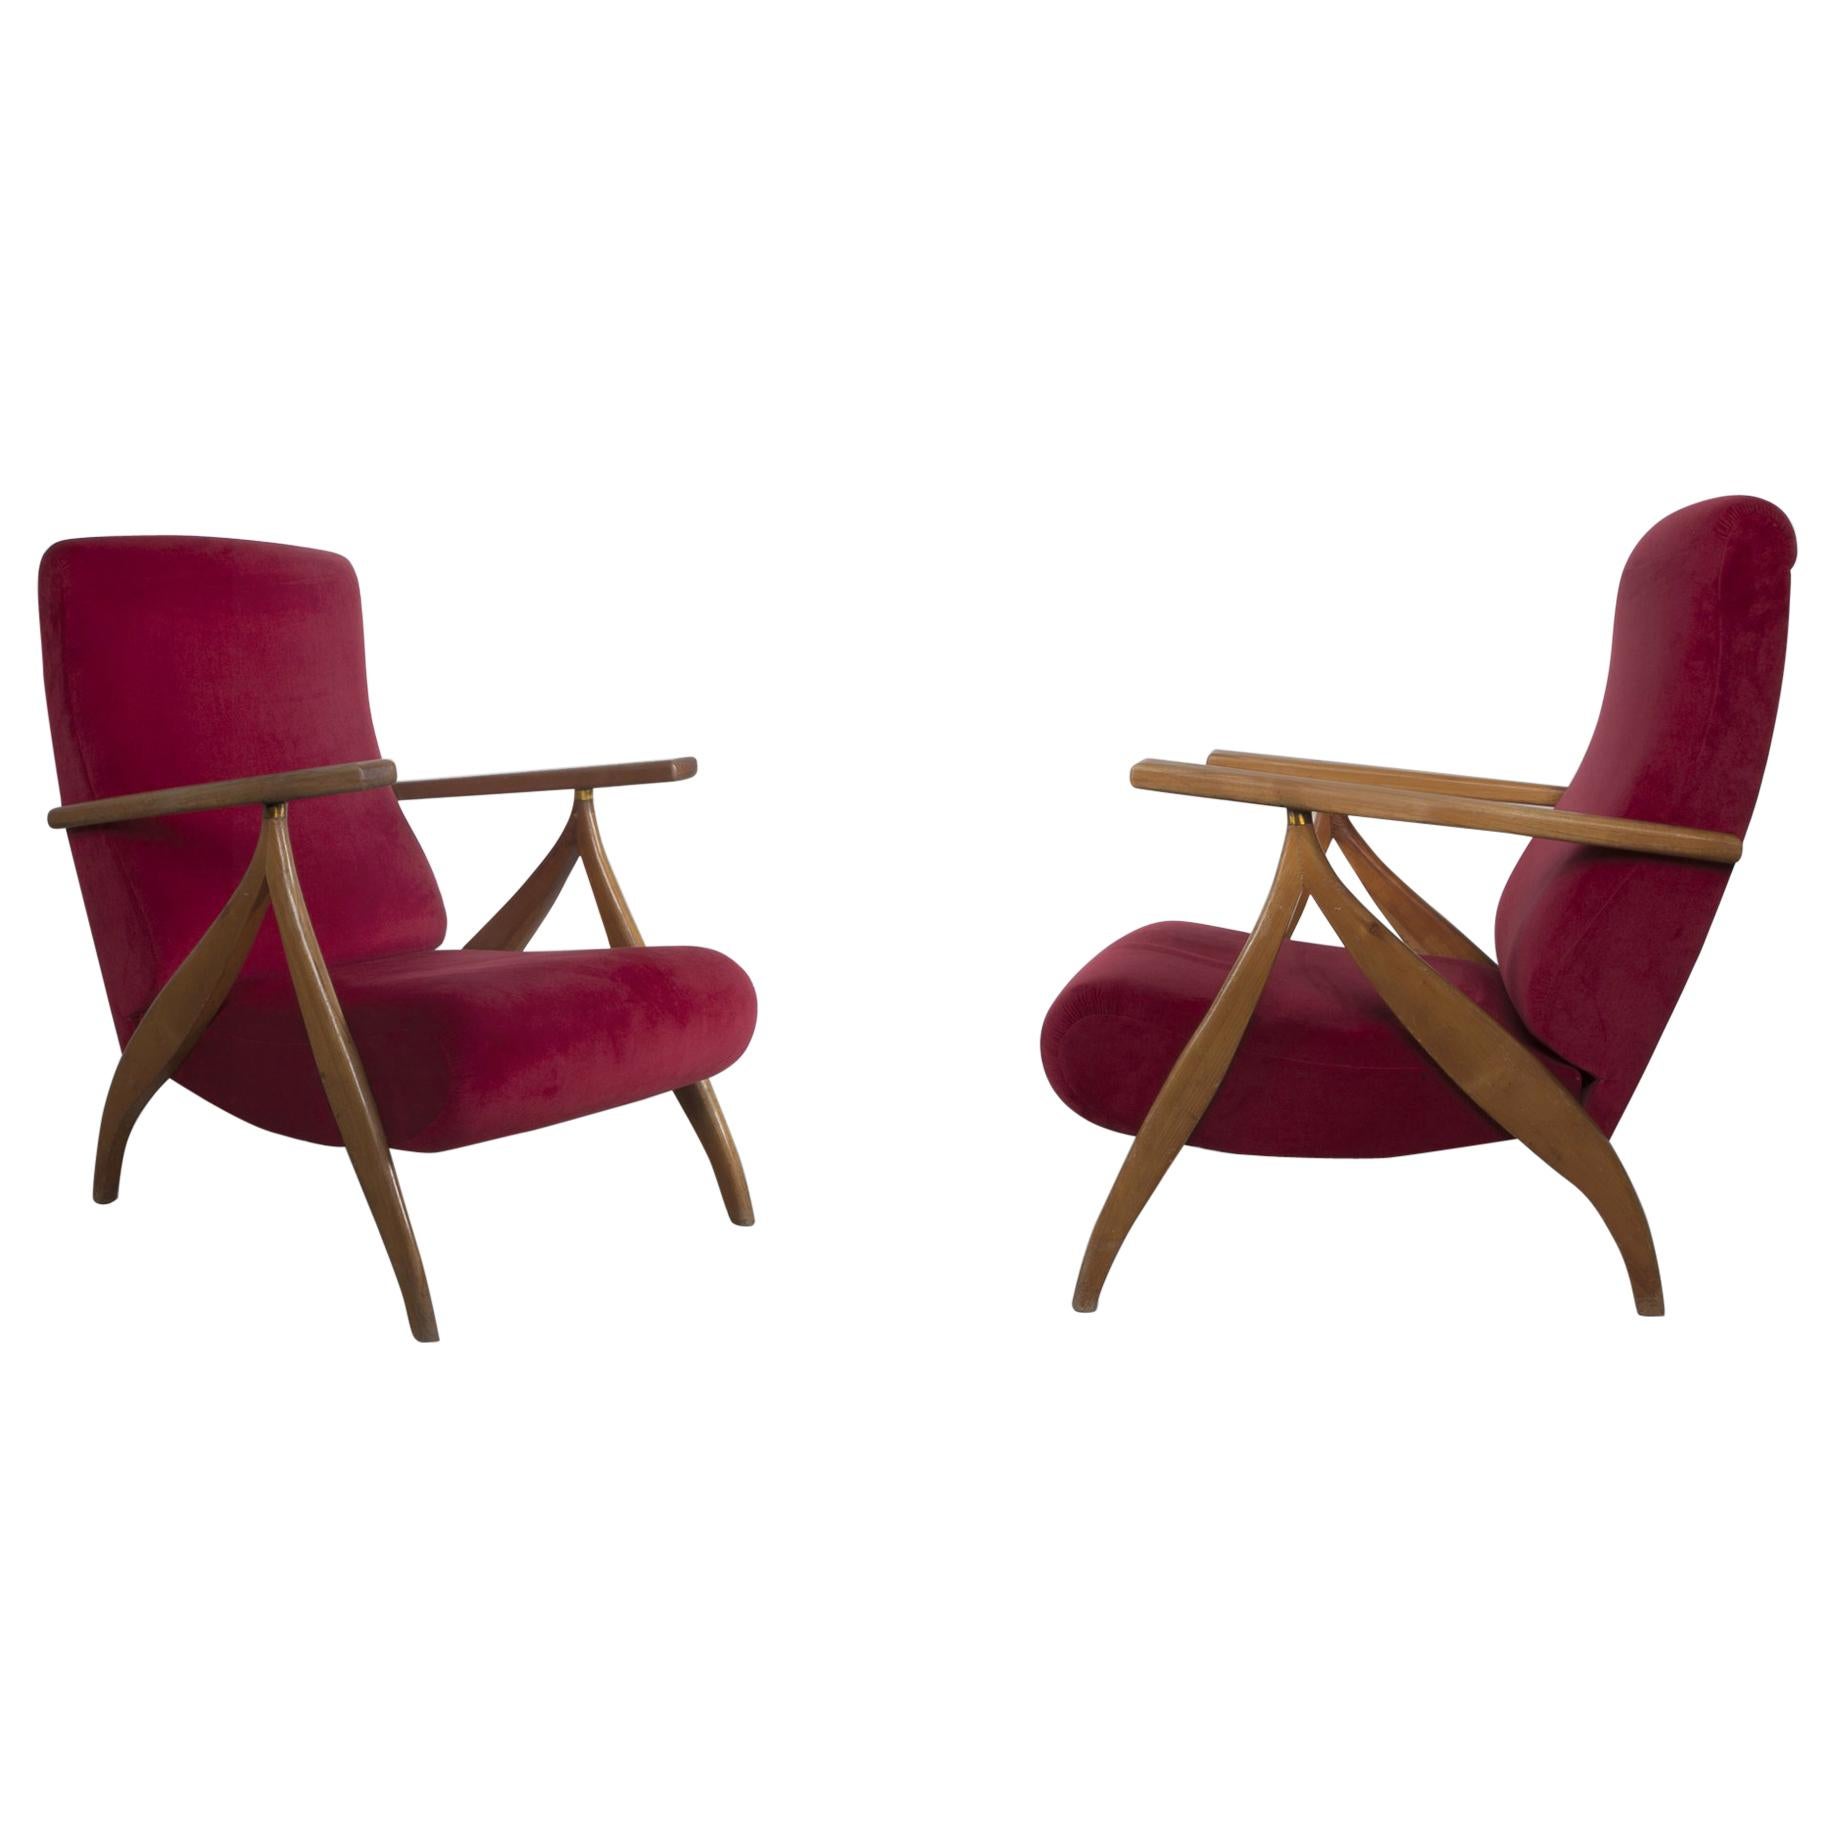 Italian Production, Pair of High Back Armchairs, 1950s For Sale